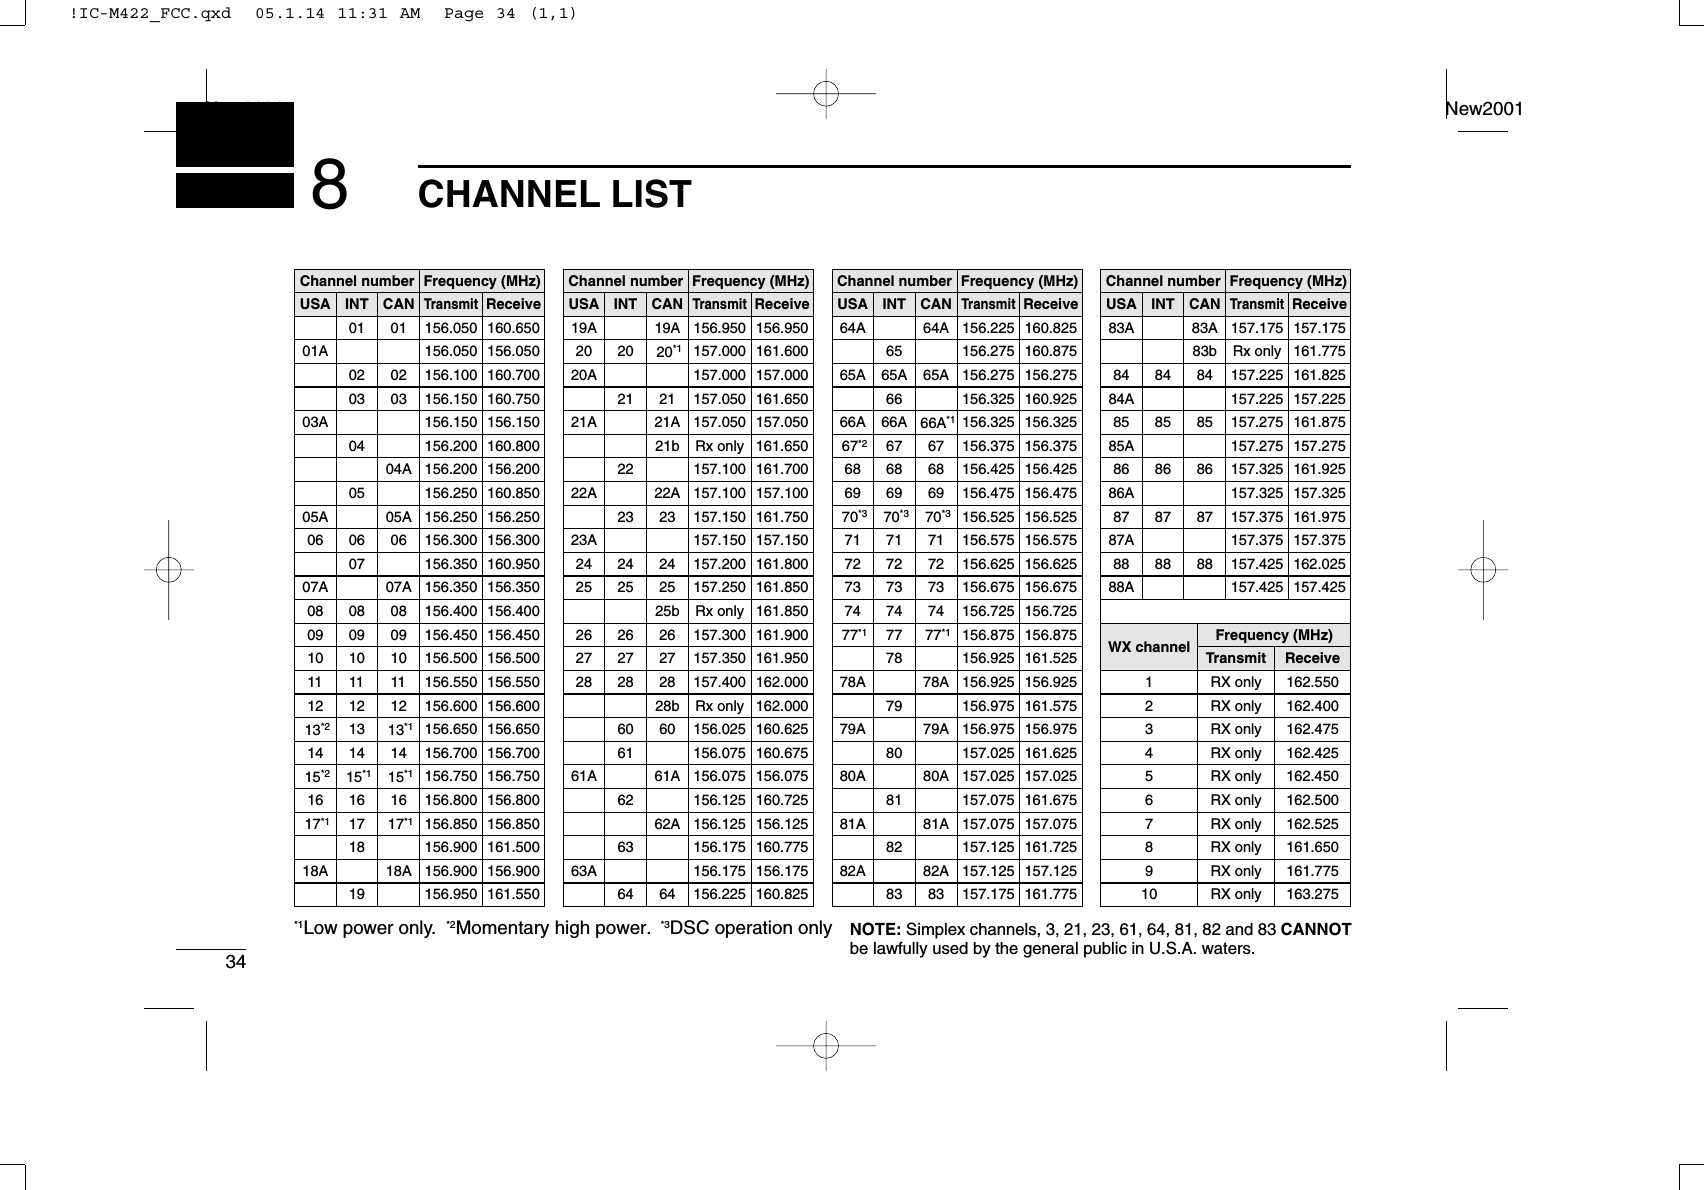 34CHANNEL LISTNew2001New20018Channel numberUSA CANTransmitReceive01 156.050 160.65001A 156.050 156.05002 156.100 160.70003 156.150 160.75003A 156.150 156.150156.200 160.80004A 156.200 156.200156.250 160.85005A 05A 156.250 156.25006 06 156.300 156.300156.350 160.95007A 07A 156.350 156.35008 08 156.400 156.40009 09 156.450 156.45010 10 156.500 156.50011 11 156.550 156.55012 12 156.600 156.60013*213*1156.650 156.65014 14 156.700 156.70015*215*1156.750 156.75016 16 156.800 156.80017*117*1156.850 156.850156.900 161.50018A 18A 156.900 156.900Frequency (MHz)INT010203040506070809101112131415*1161718Channel number Frequency (MHz)USA CANTransmitReceive19A 19A 156.950 156.95020 20*1157.000 161.60021 157.050 161.65021A 21A 157.050 157.050157.100 161.70022A 22A 157.100 157.10023 157.150 161.75023A 157.150 157.15024 24 157.200 161.80025 25 157.250 161.85026 26 157.300 161.90027 27 157.350 161.95028 28 157.400 162.00060 156.025 160.625156.075 160.67561A 61A 156.075 156.075156.125 160.72562A 156.125 156.125156.175 160.77563A 156.175 156.17564 156.225 160.825INT202122232425262728606162636420A 157.000 157.000Channel number66AFrequency (MHz)66A*1USA CANTransmitReceive64A 64A 156.225 160.82565A 65A 156.275 156.275156.325 160.92567*267 156.375 156.37568 68 156.425 156.42569 69 156.475 156.47570*370*3156.525 156.52571 71 156.575 156.57572 72 156.625 156.62573 73 156.675 156.67574 74 156.725 156.72577*177*1156.875 156.875156.925 161.52578A 78A 156.925 156.925156.975 161.57579A 79A 156.975 156.975157.025 161.62580A 80A 157.025 157.025157.075 161.67581A 81A 157.075 157.075157.125 161.72582A 82A 157.125 157.125INT65A6667686970*371727374777879808182156.325 156.32566AChannel number84AFrequency (MHz)USA CANTransmitReceive83A 83A 157.175 157.17584 84 157.225 161.82585 85 157.275 161.87585A 157.275 157.27586 86 157.325 161.92586A 157.325 157.32587 87 157.375 161.97587A 157.375 157.37588 88 157.425 162.02588A 157.425 157.425INT8485868788157.225 157.225WX channel4Frequency (MHz)Transmit Receive1 RX only 162.5502 RX only 162.4003 RX only 162.4755 RX only 162.4506 RX only 162.5007 RX only 162.5258 RX only 161.6509 RX only 161.77510 RX only 163.275RX only 162.425*1Low power only.*3DSC operation only 156.950 161.5501921b Rx only 161.65025b Rx only 161.850156.275 160.8756528b Rx only 162.00083 157.175 161.7758383b Rx only 161.775*2Momentary high power.NOTE: Simplex channels, 3, 21, 23, 61, 64, 81, 82 and 83 CANNOTbe lawfully used by the general public in U.S.A. waters.!IC-M422_FCC.qxd  05.1.14 11:31 AM  Page 34 (1,1)